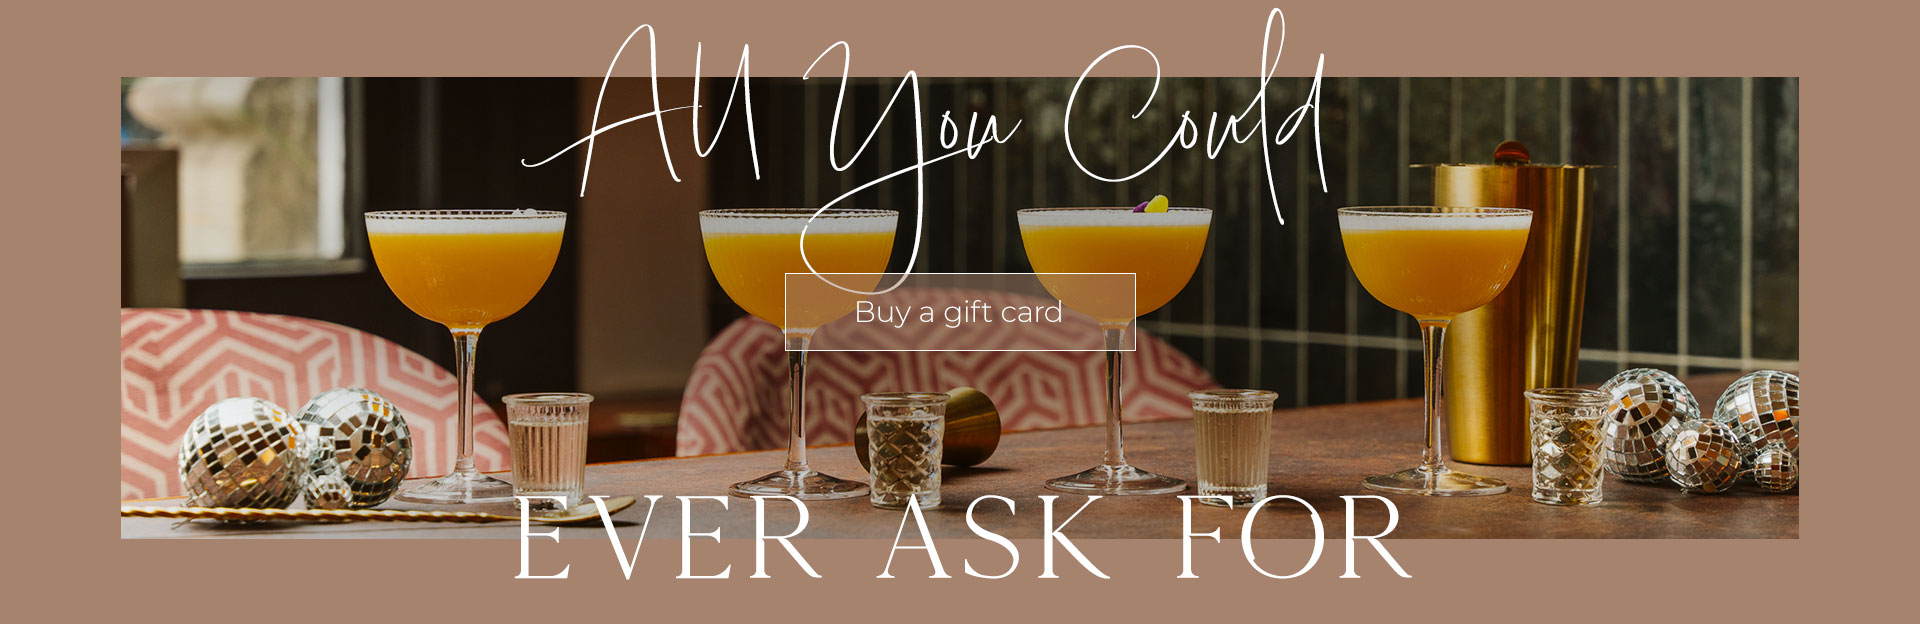 All Bar One Gift Cards at All Bar One Newcastle